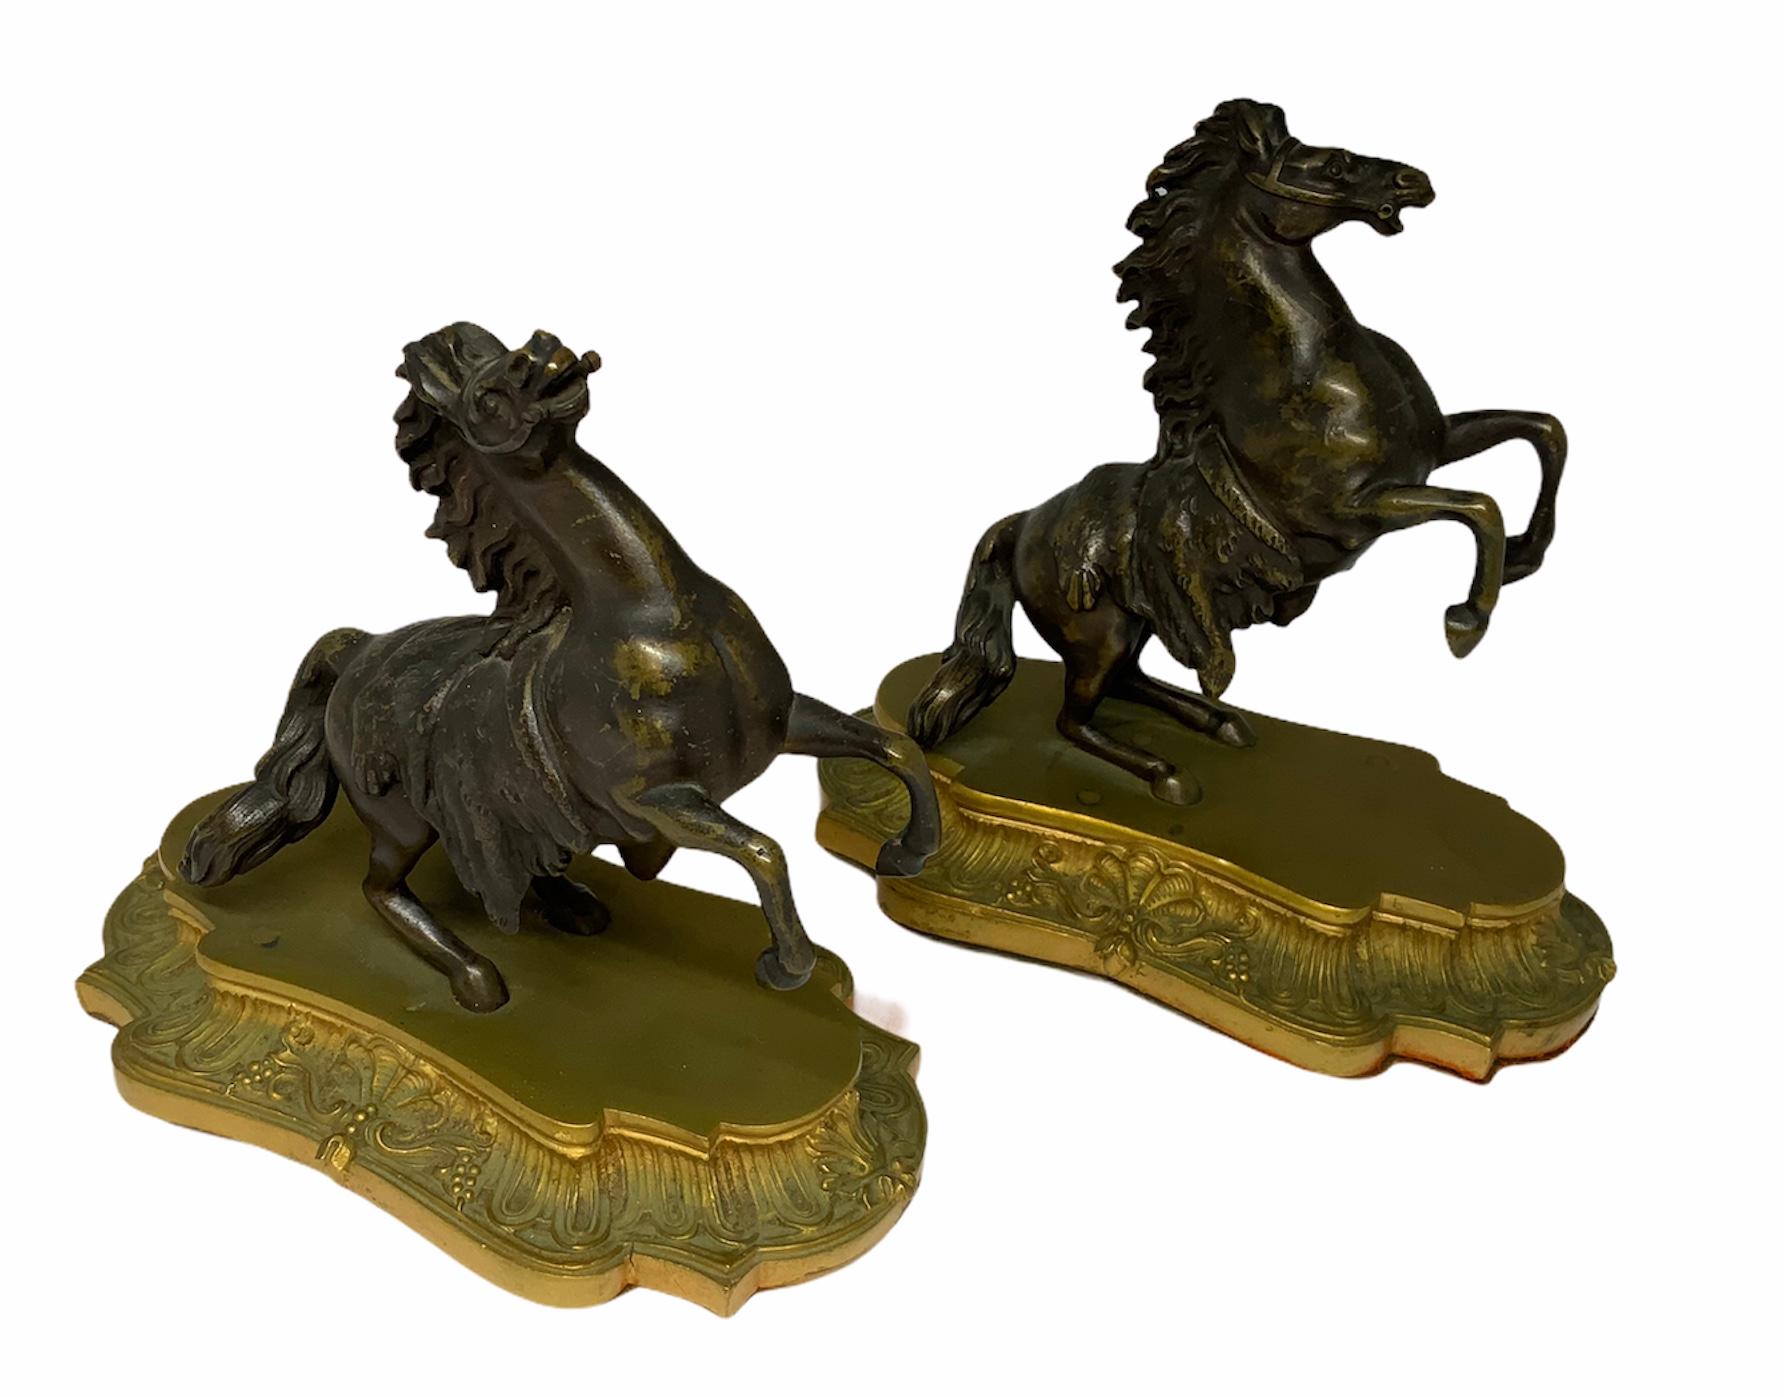 A pair of patinated bronze bookends depicting rearing horses figurines resting on a gilt bronze Rococo base.